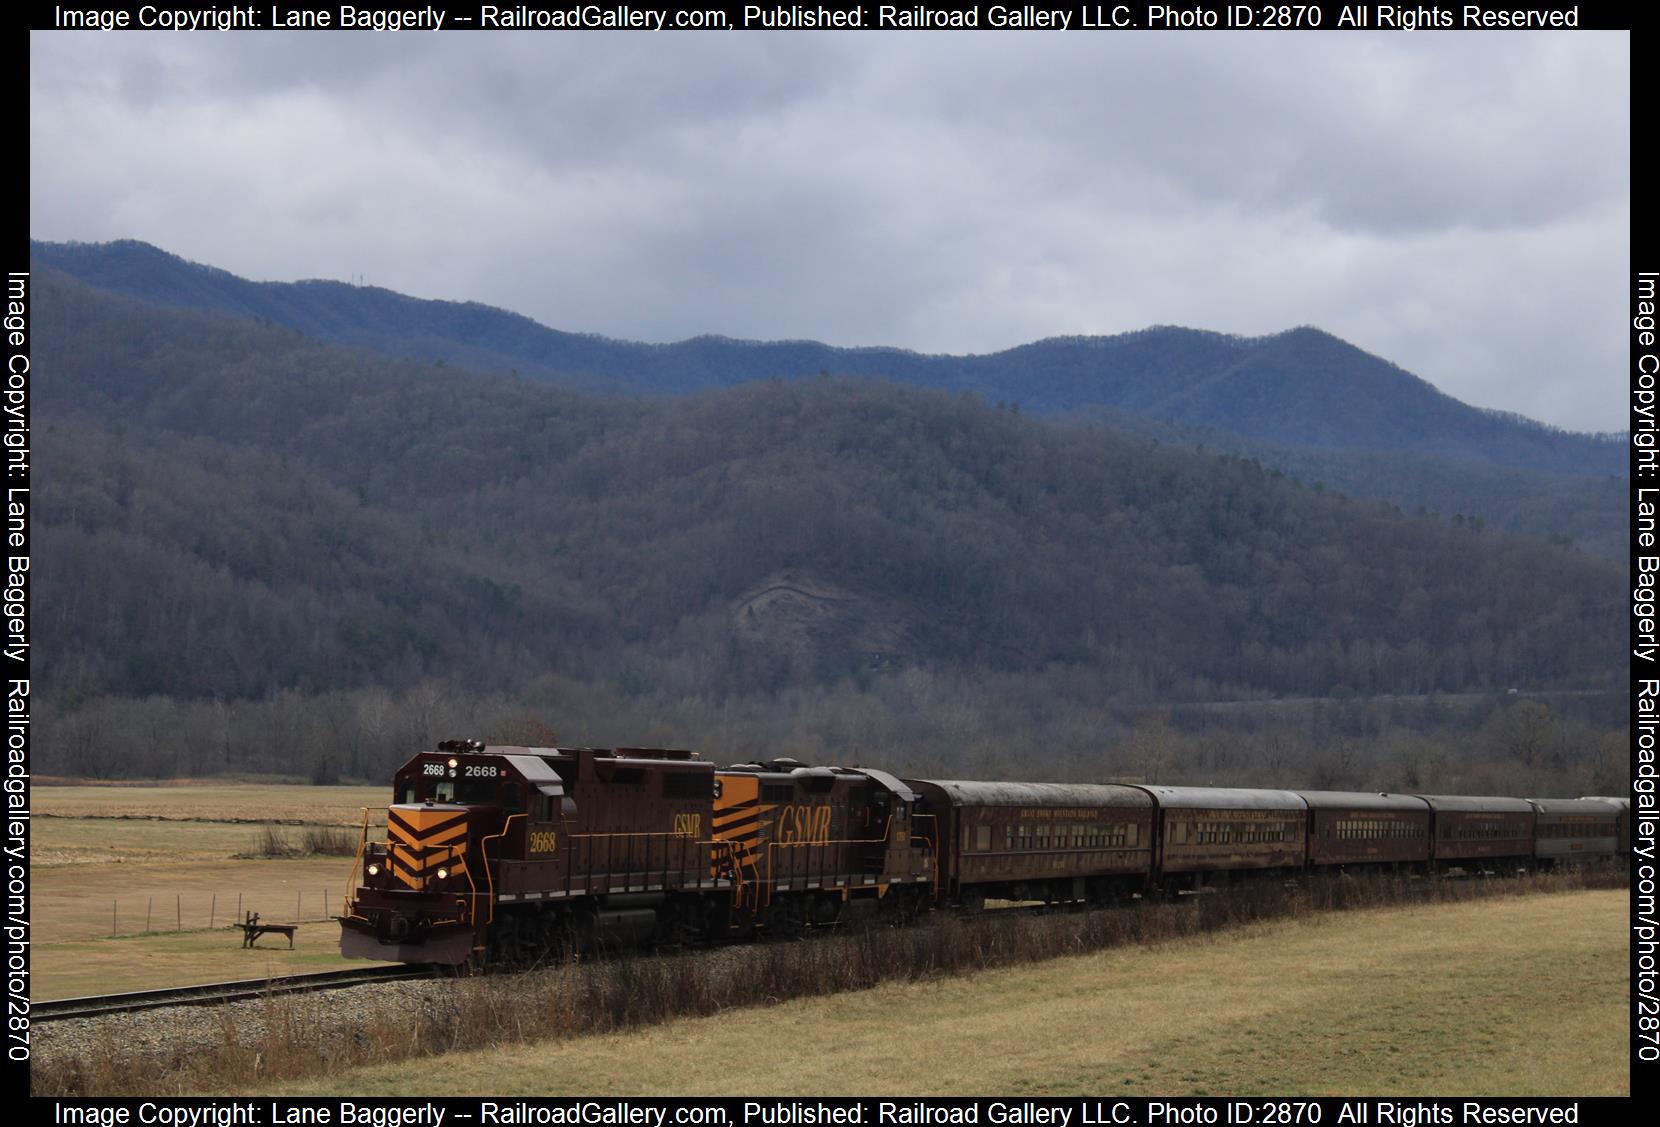 GSMR 2668, GSMR 1751 is a class EMD GP38-2, GP7 and  is pictured in Bryson City, North Carolina, United States.  This was taken along the Murphy Branch on the Great Smoky Mountain . Photo Copyright: Lane Baggerly uploaded to Railroad Gallery on 01/05/2024. This photograph of GSMR 2668, GSMR 1751 was taken on Thursday, December 28, 2023. All Rights Reserved. 